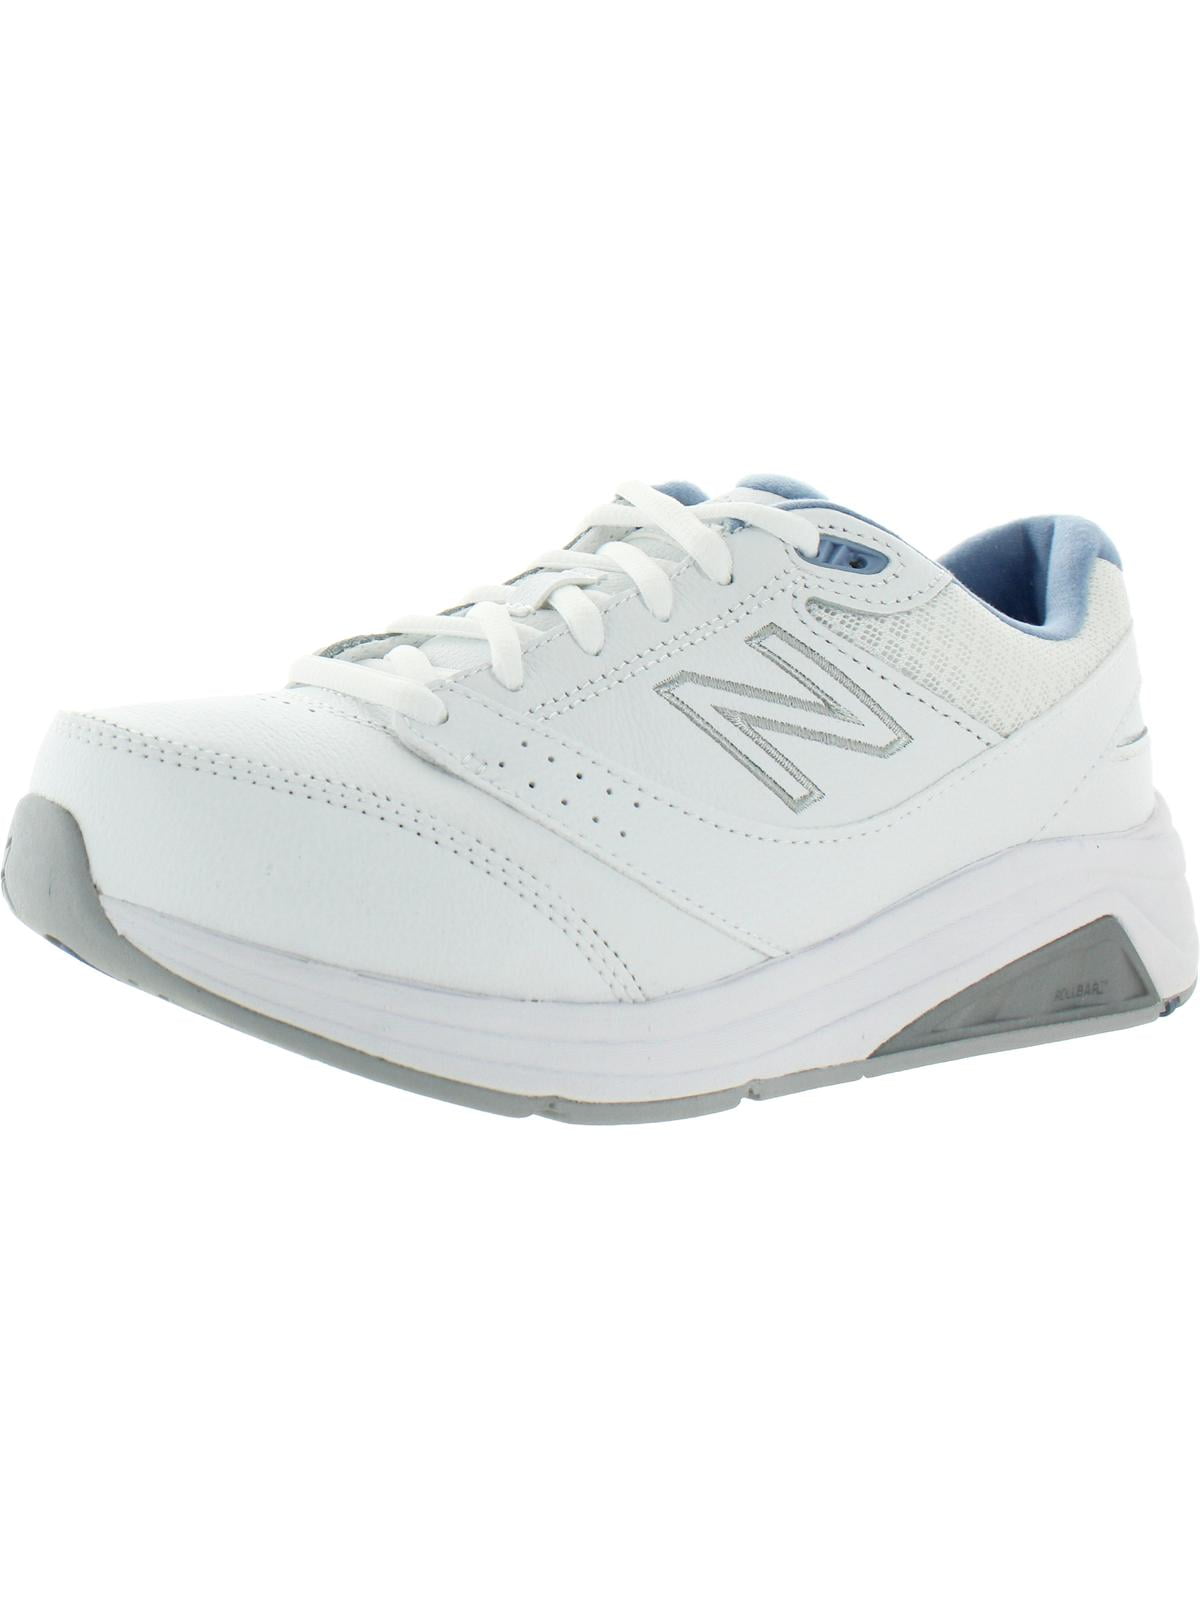 Men's New Balance MW928WT3 Neutral Stability Walking Shoes with ROLLBA